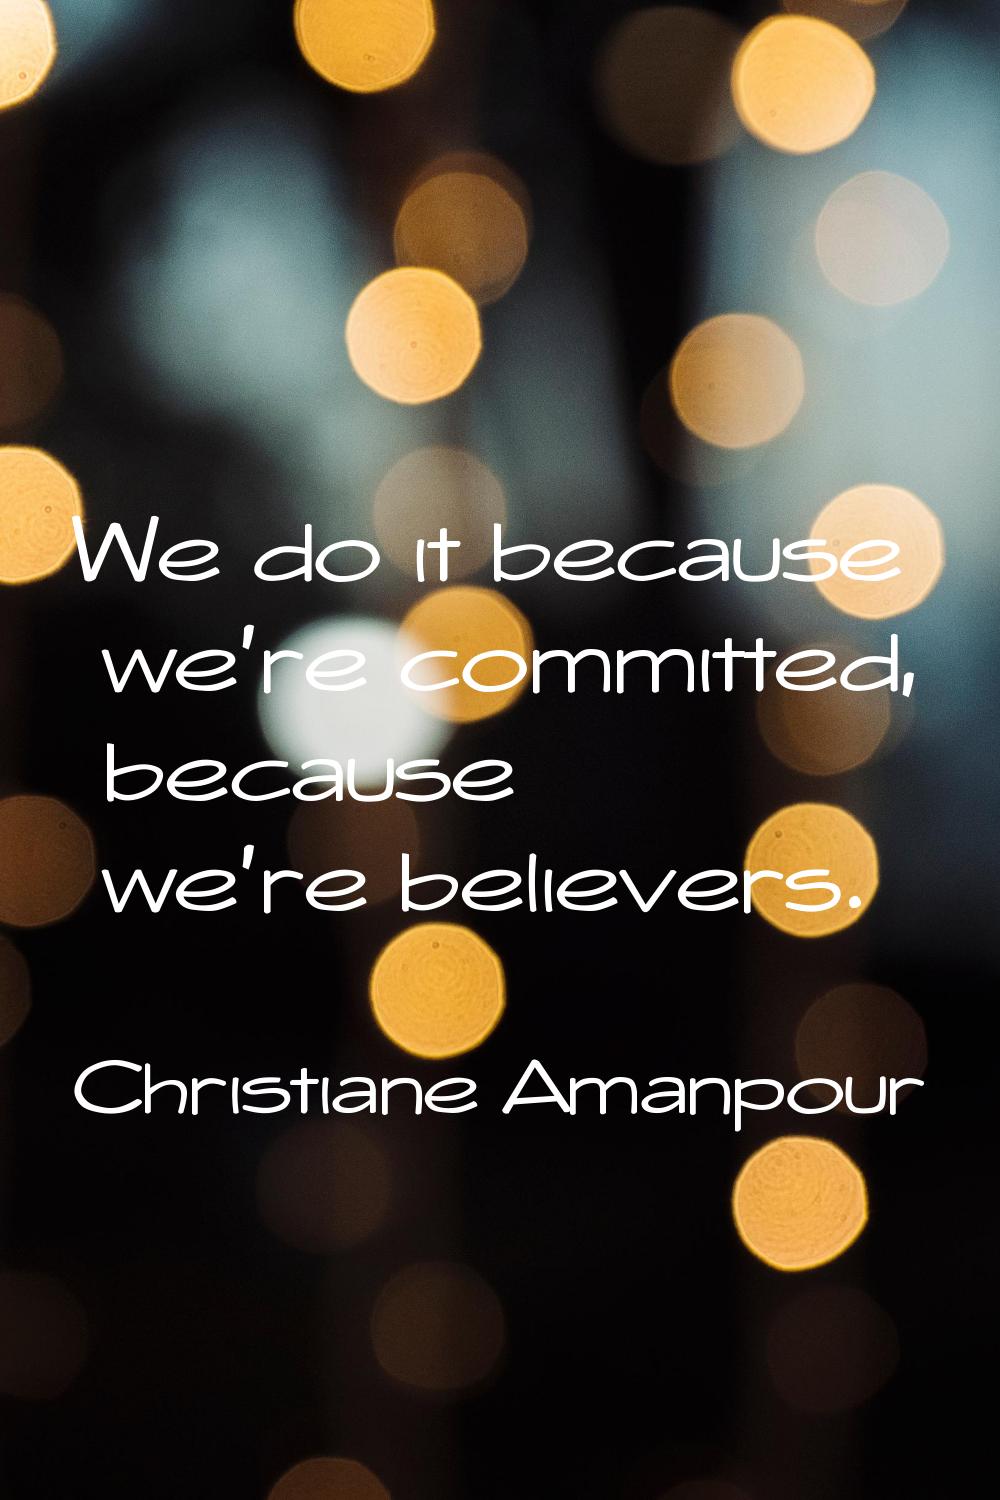 We do it because we're committed, because we're believers.